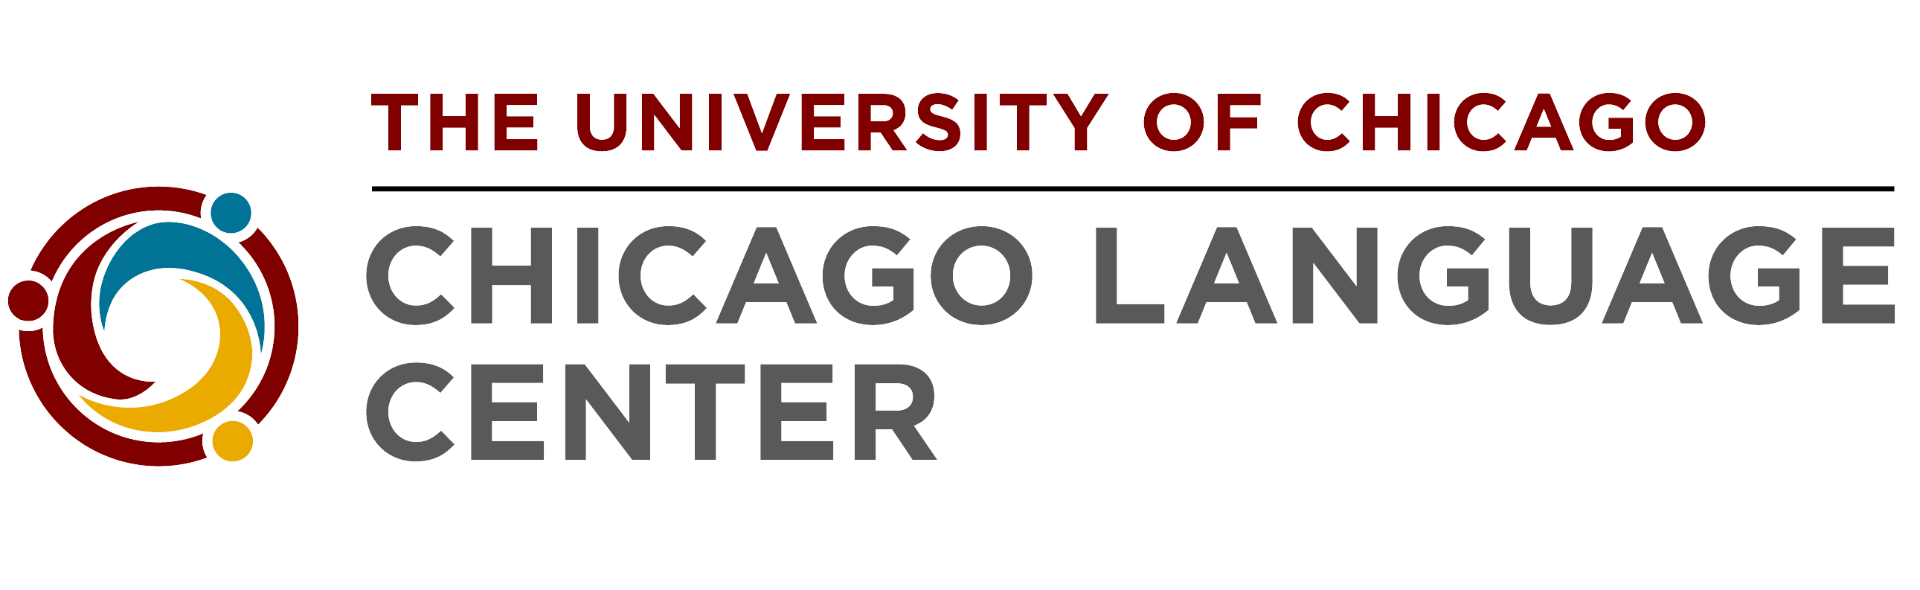 Chicago Language Center Logo.  Links to the CLC homepage.  